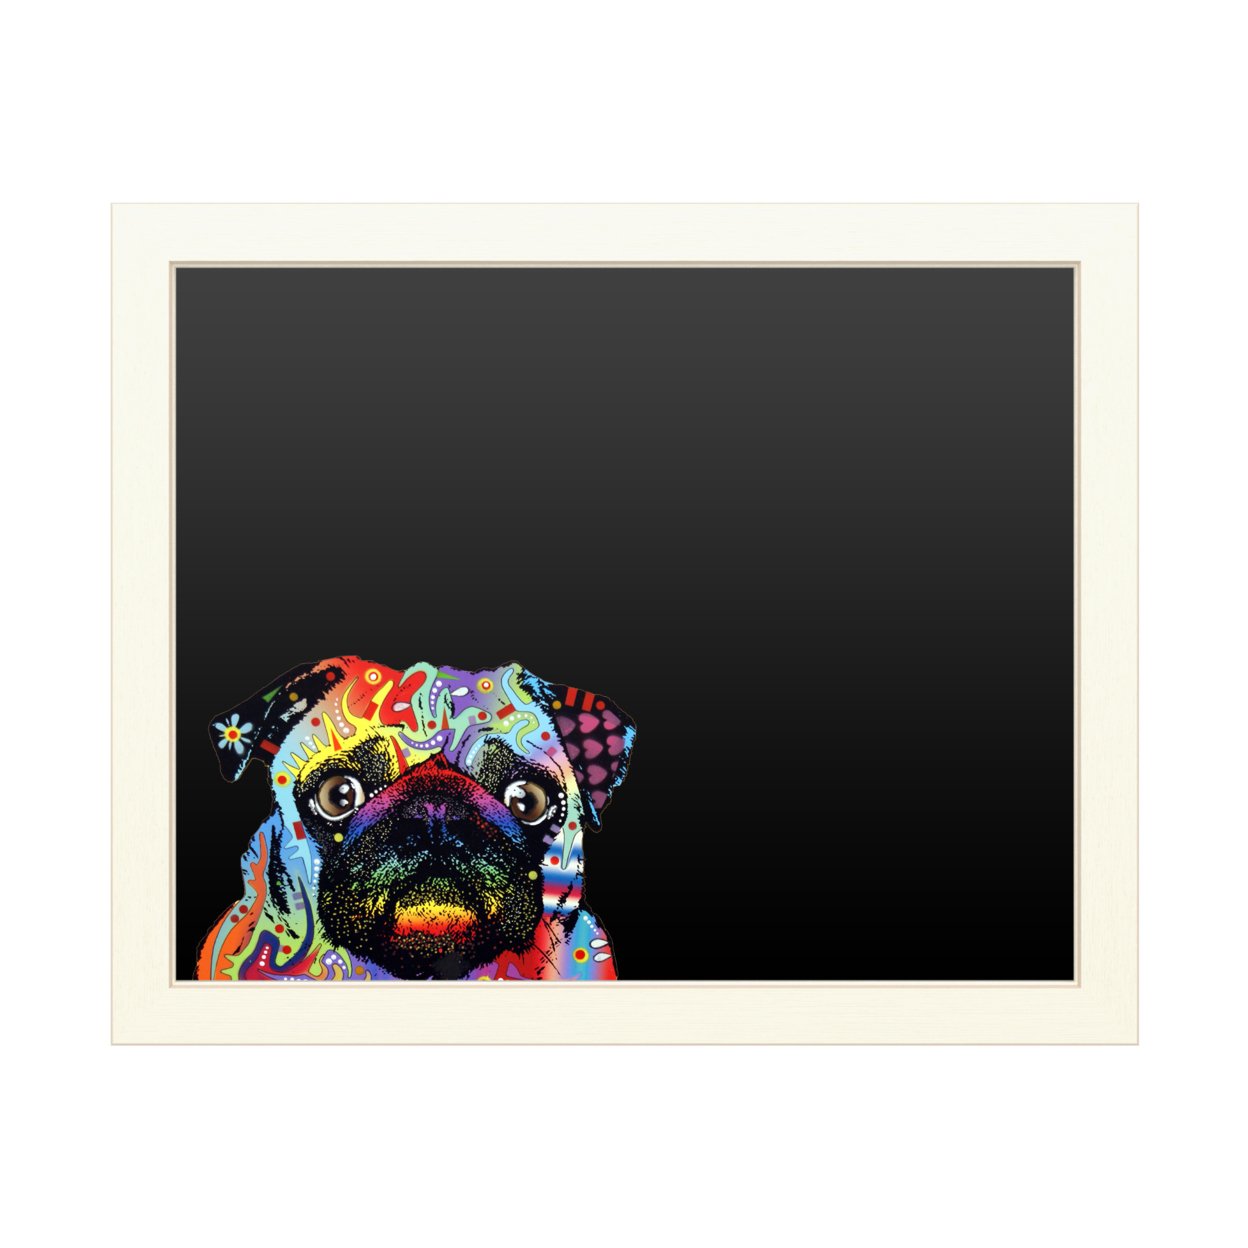 16 X 20 Chalk Board With Printed Artwork - Dean Russo Pug White Board - Ready To Hang Chalkboard